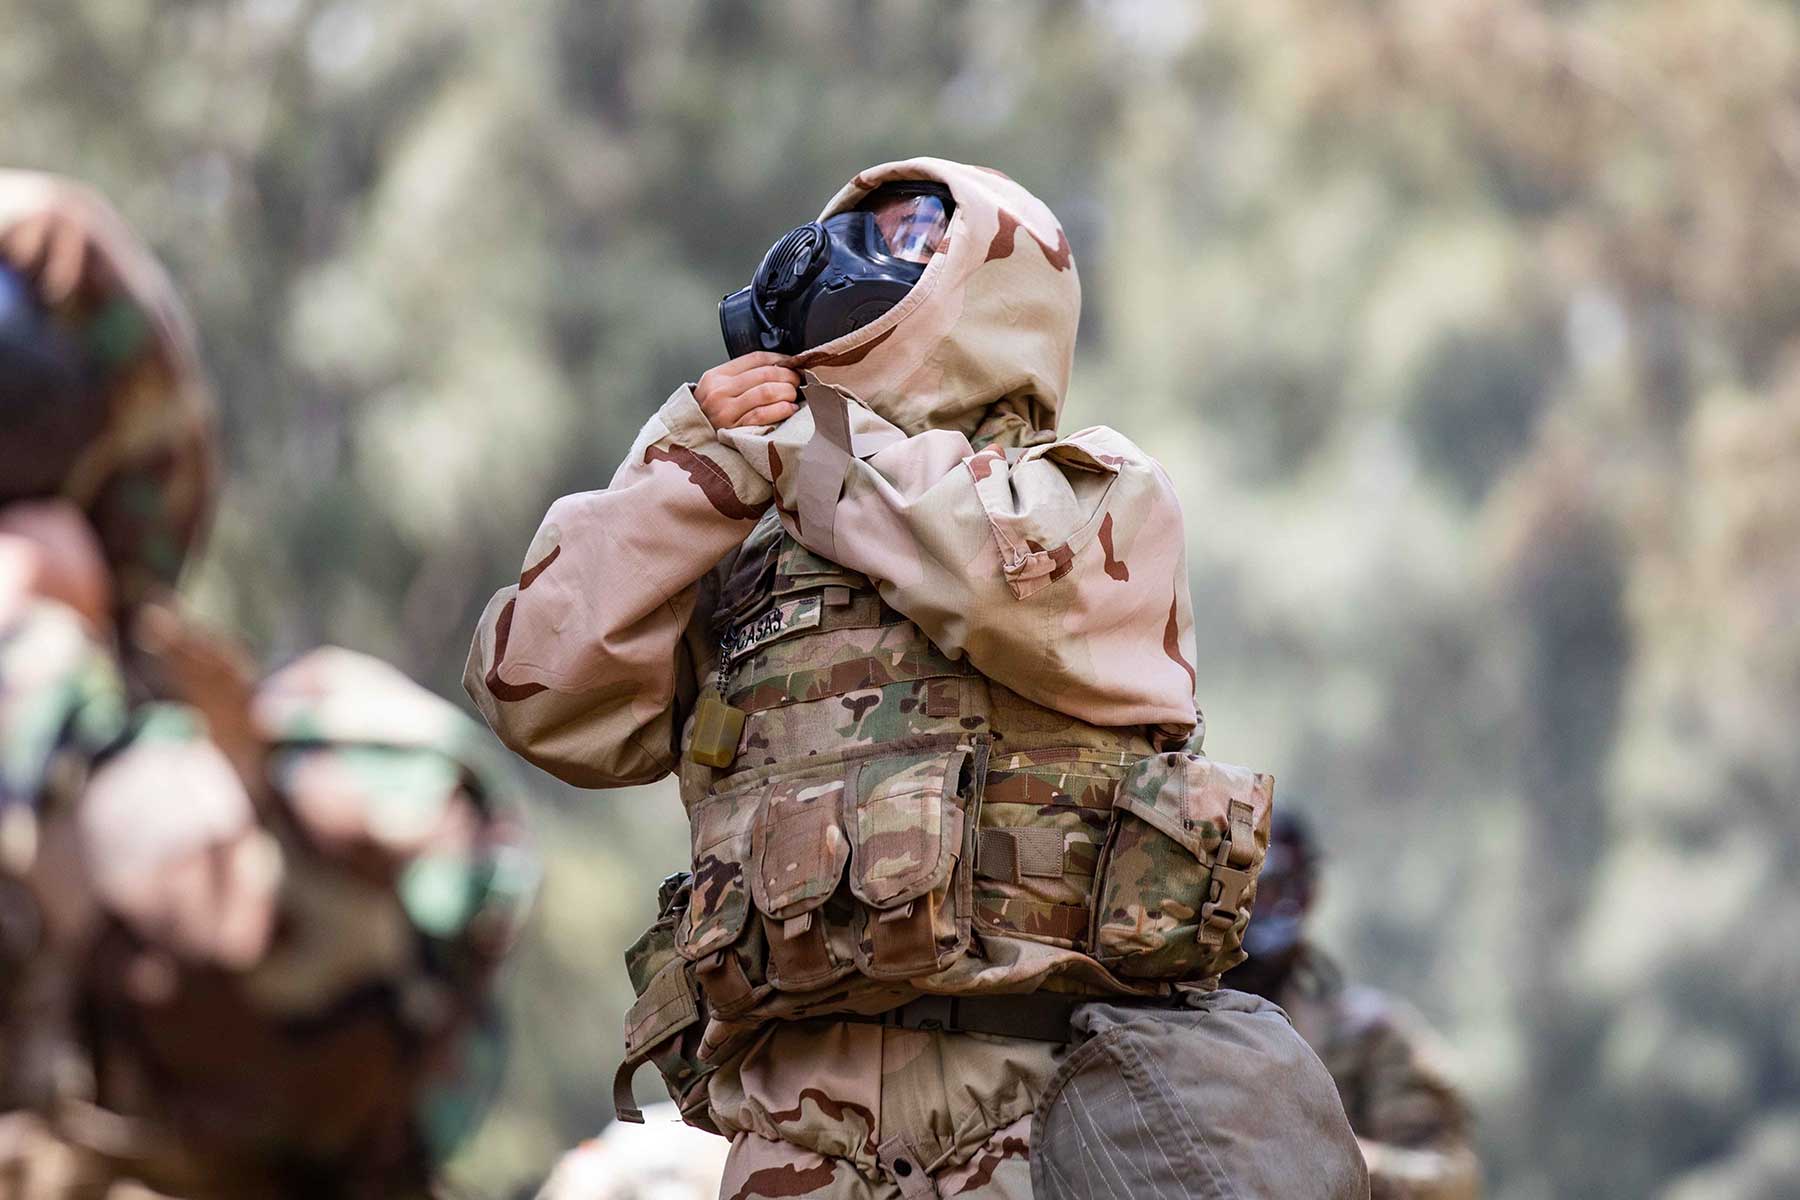 Soldier conducts a Chemical, Biological, Radiological, and Nuclear (CBRN) Academy.